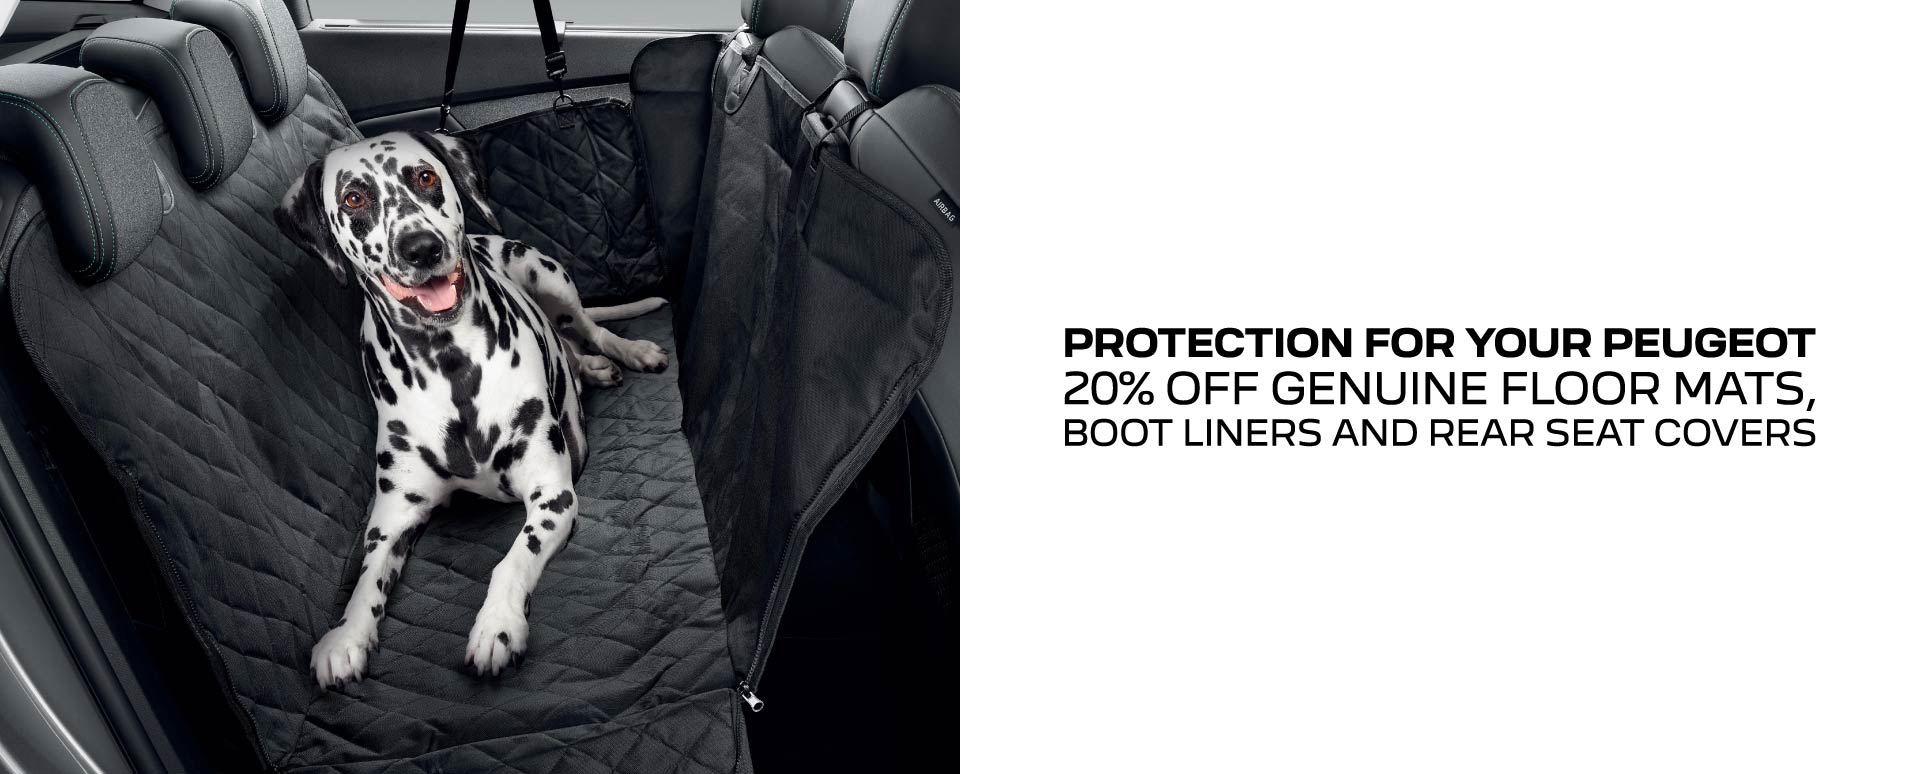 Peugeot Accessories Offer